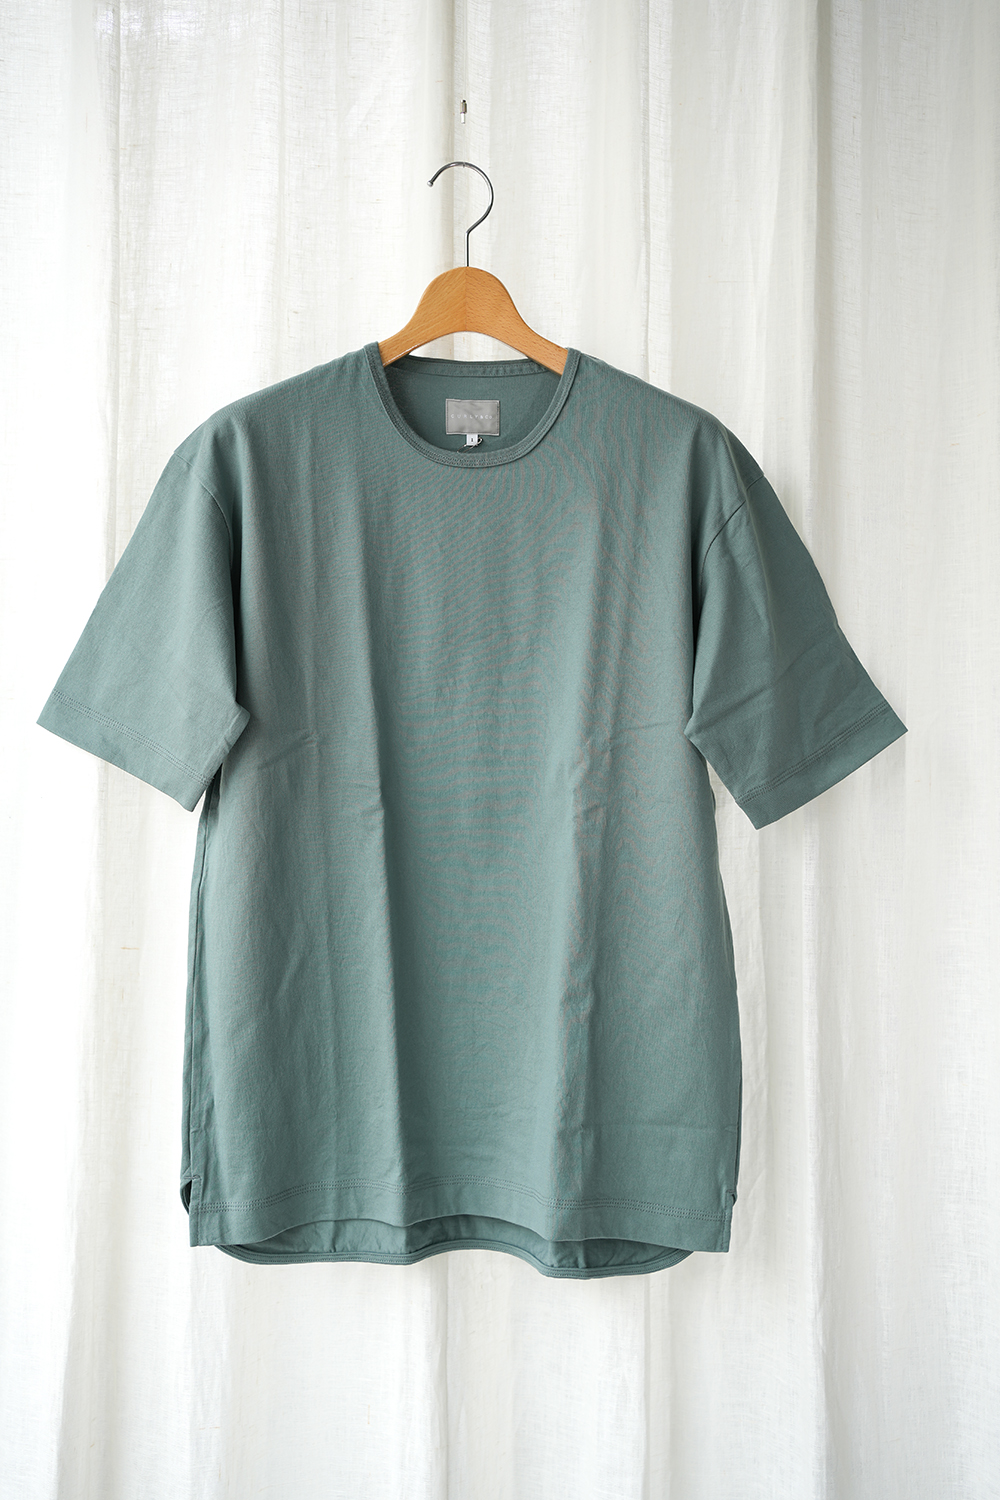 TRIPLE STITCHED S/S TEE